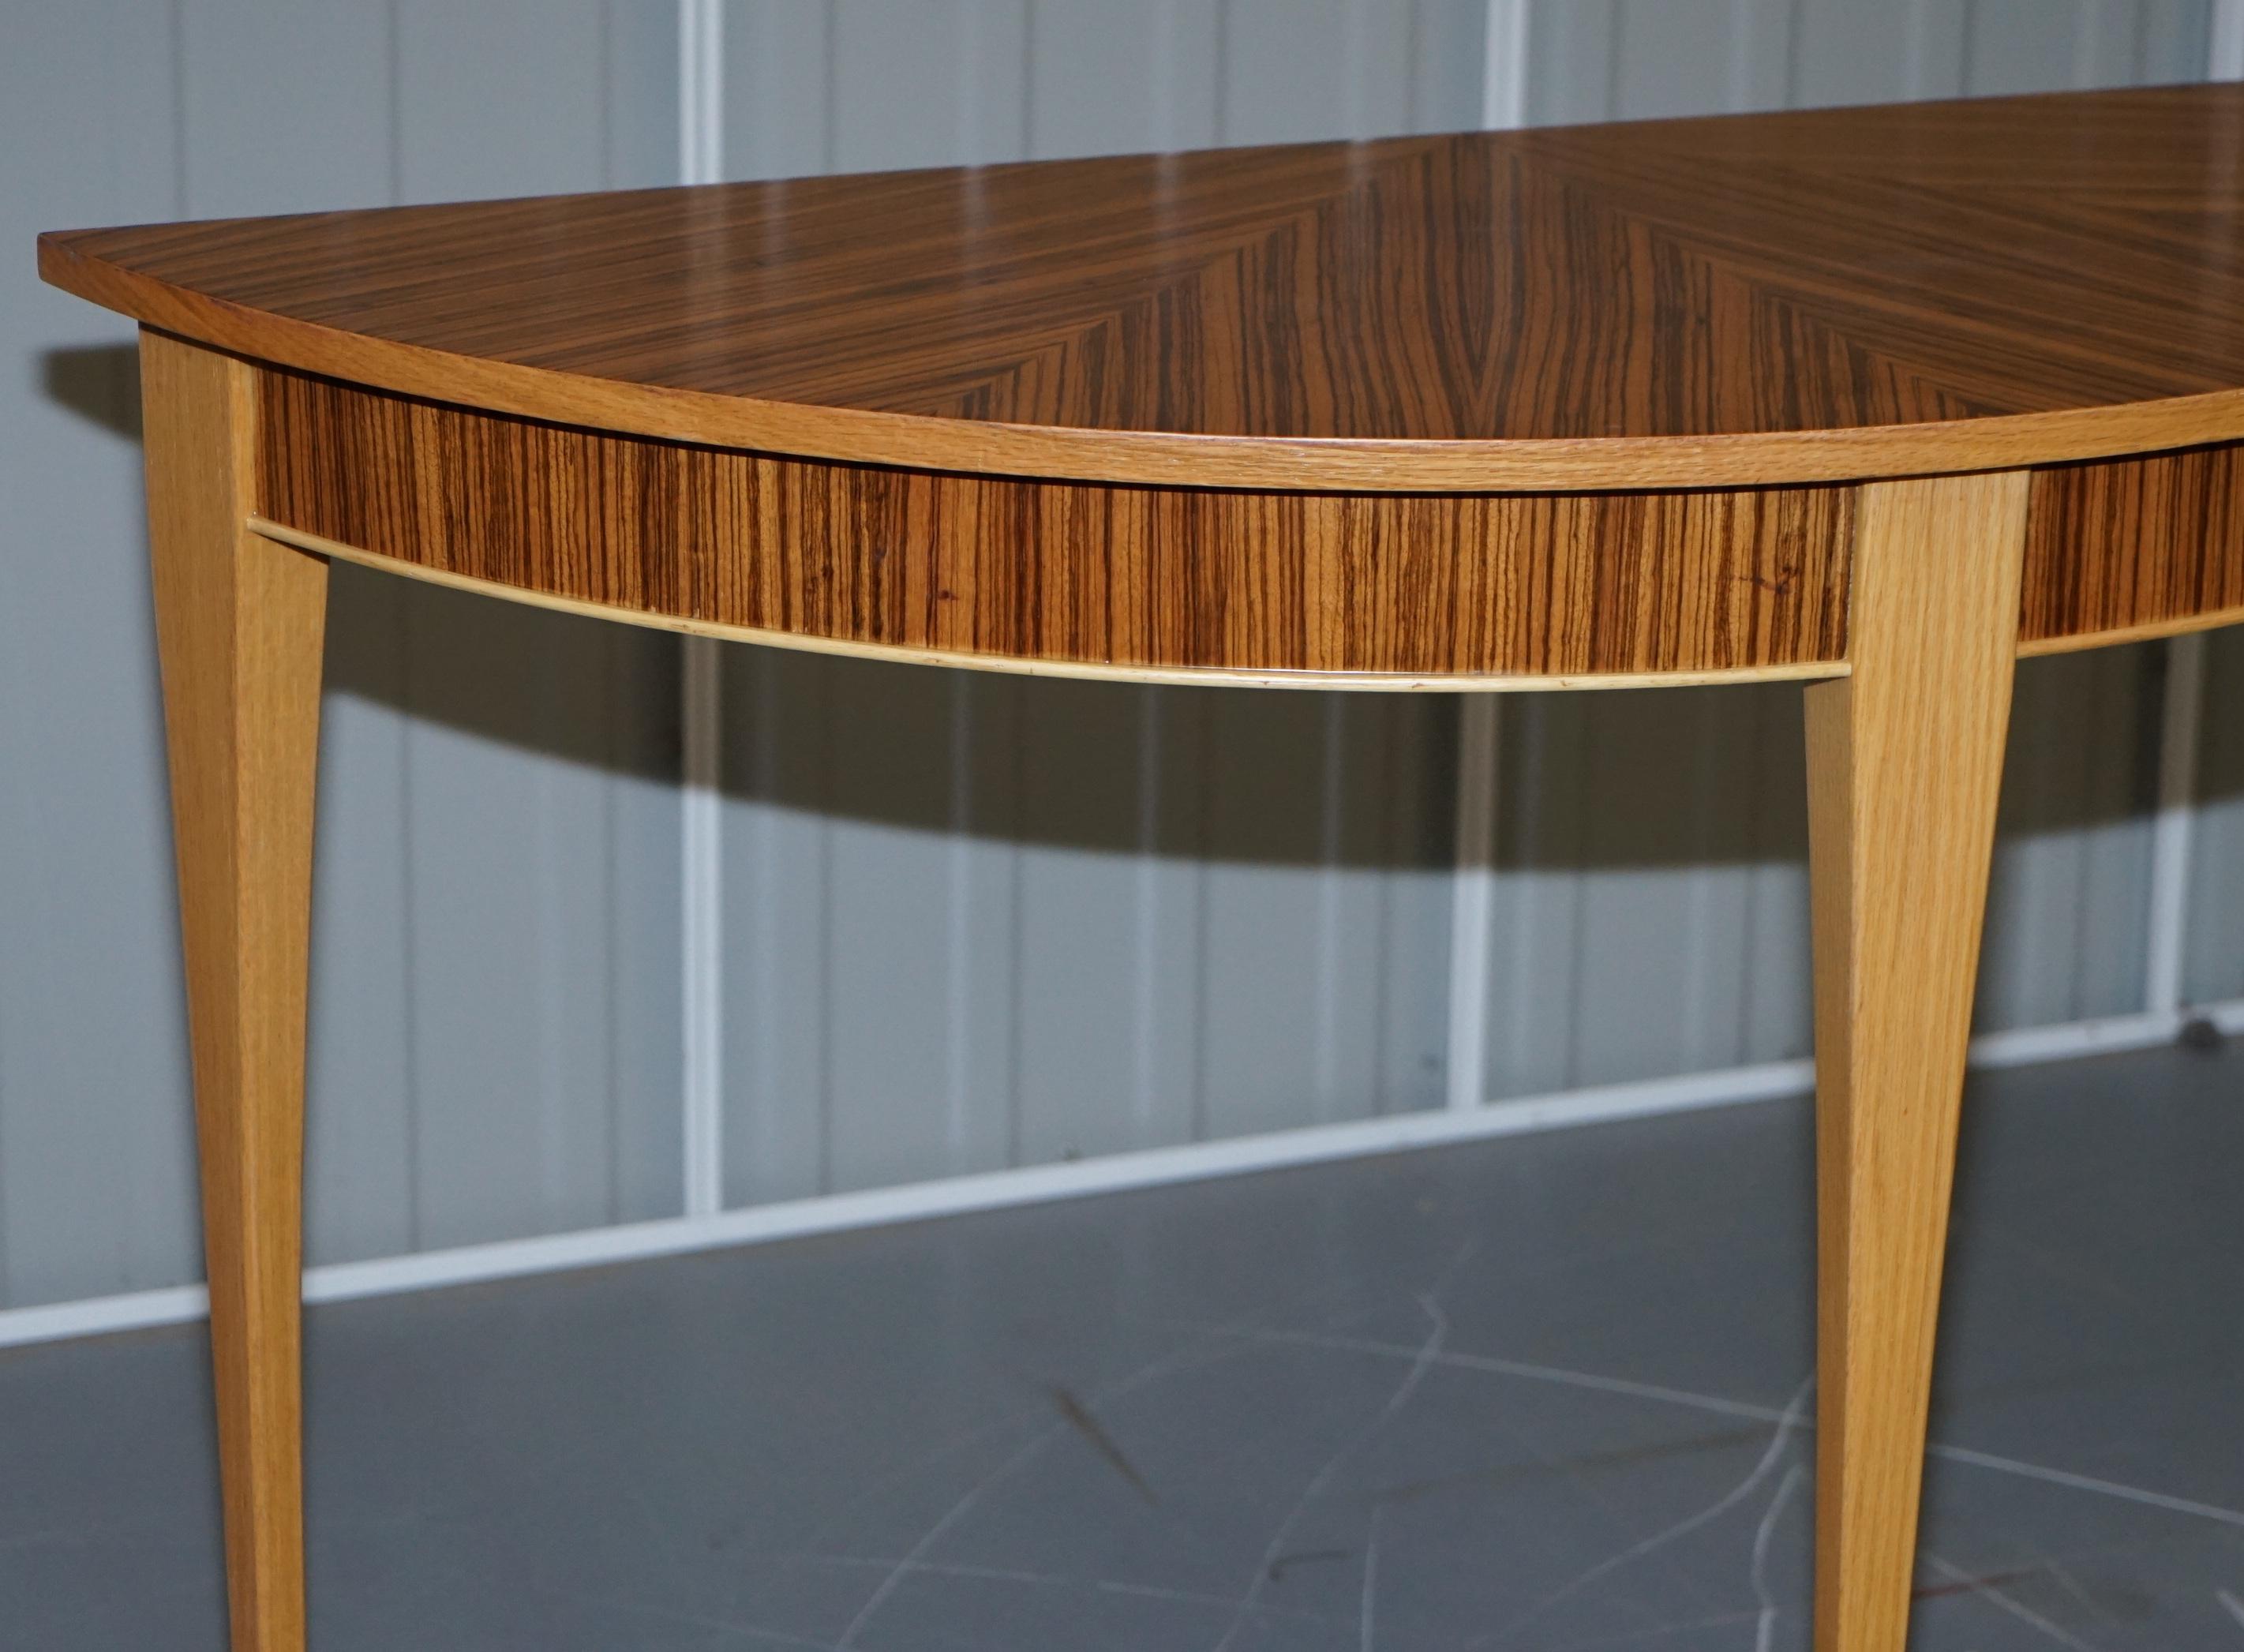 X2 Lovely Bevan Funnell Phoenix Zebrano Wood Demilune Console Tables For Sale 2